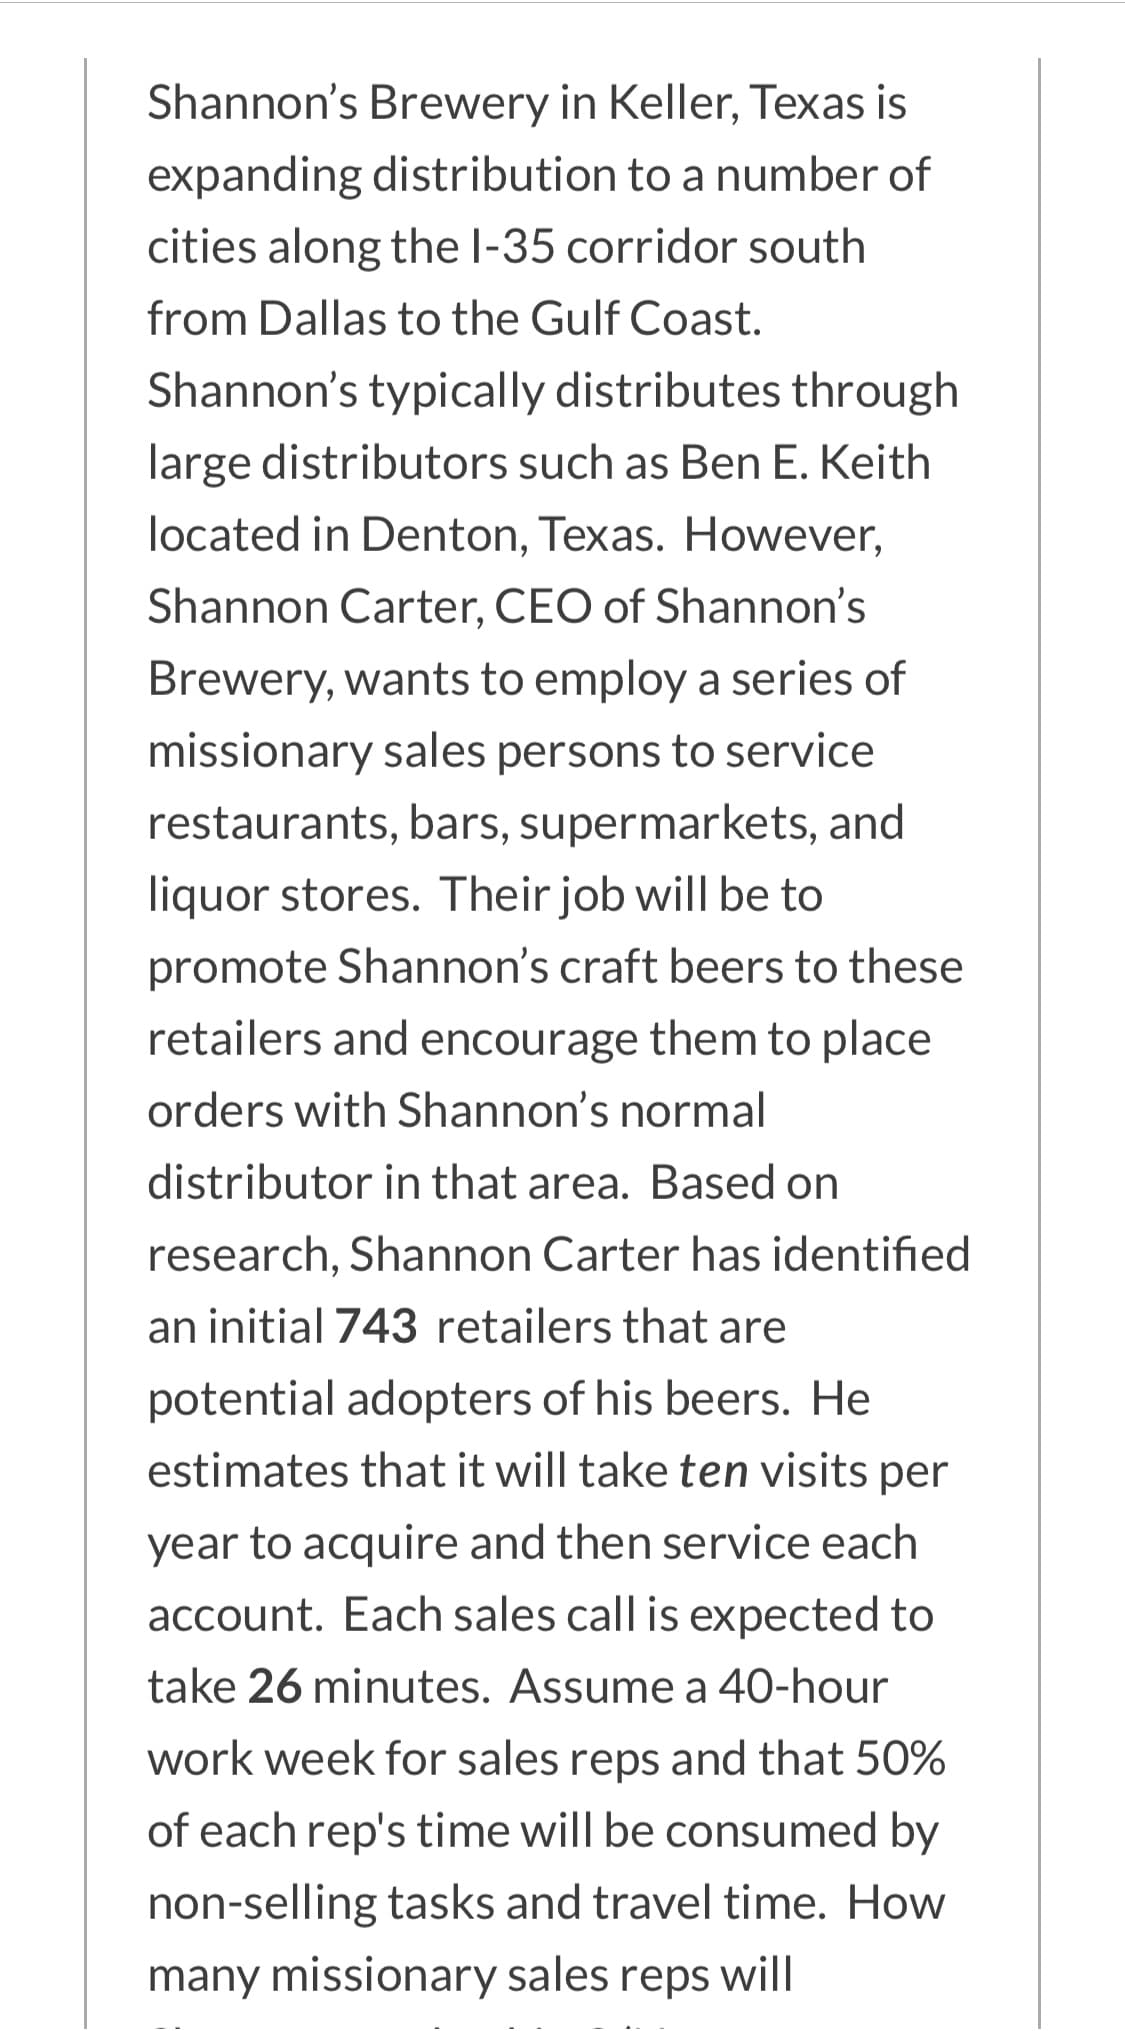 Shannon's Brewery in Keller, Texas is
expanding distribution to a number of
cities along the l-35 corridor south
from Dallas to the Gulf Coast.
Shannon's typically distributes through
large distributors such as Ben E. Keith
located in Denton, Texas. However,
Shannon Carter, CEO of Shannon's
Brewery, wants to employ a series of
missionary sales persons to service
restaurants, bars, supermarkets, and
liquor stores. Their job will be to
promote Shannon's craft beers to these
retailers and encourage them to place
orders with Shannon's normal
distributor in that area. Based on
research, Shannon Carter has identified
an initial 743 retailers that are
potential adopters of his beers. He
estimates that it will take ten visits per
year to acquire and then service each
account. Each sales call is expected to
take 26 minutes. Assume a 40-hour
work week for sales reps and that 50%
of each rep's time will be consumed by
non-selling tasks and travel time. How
many missionary sales reps will
